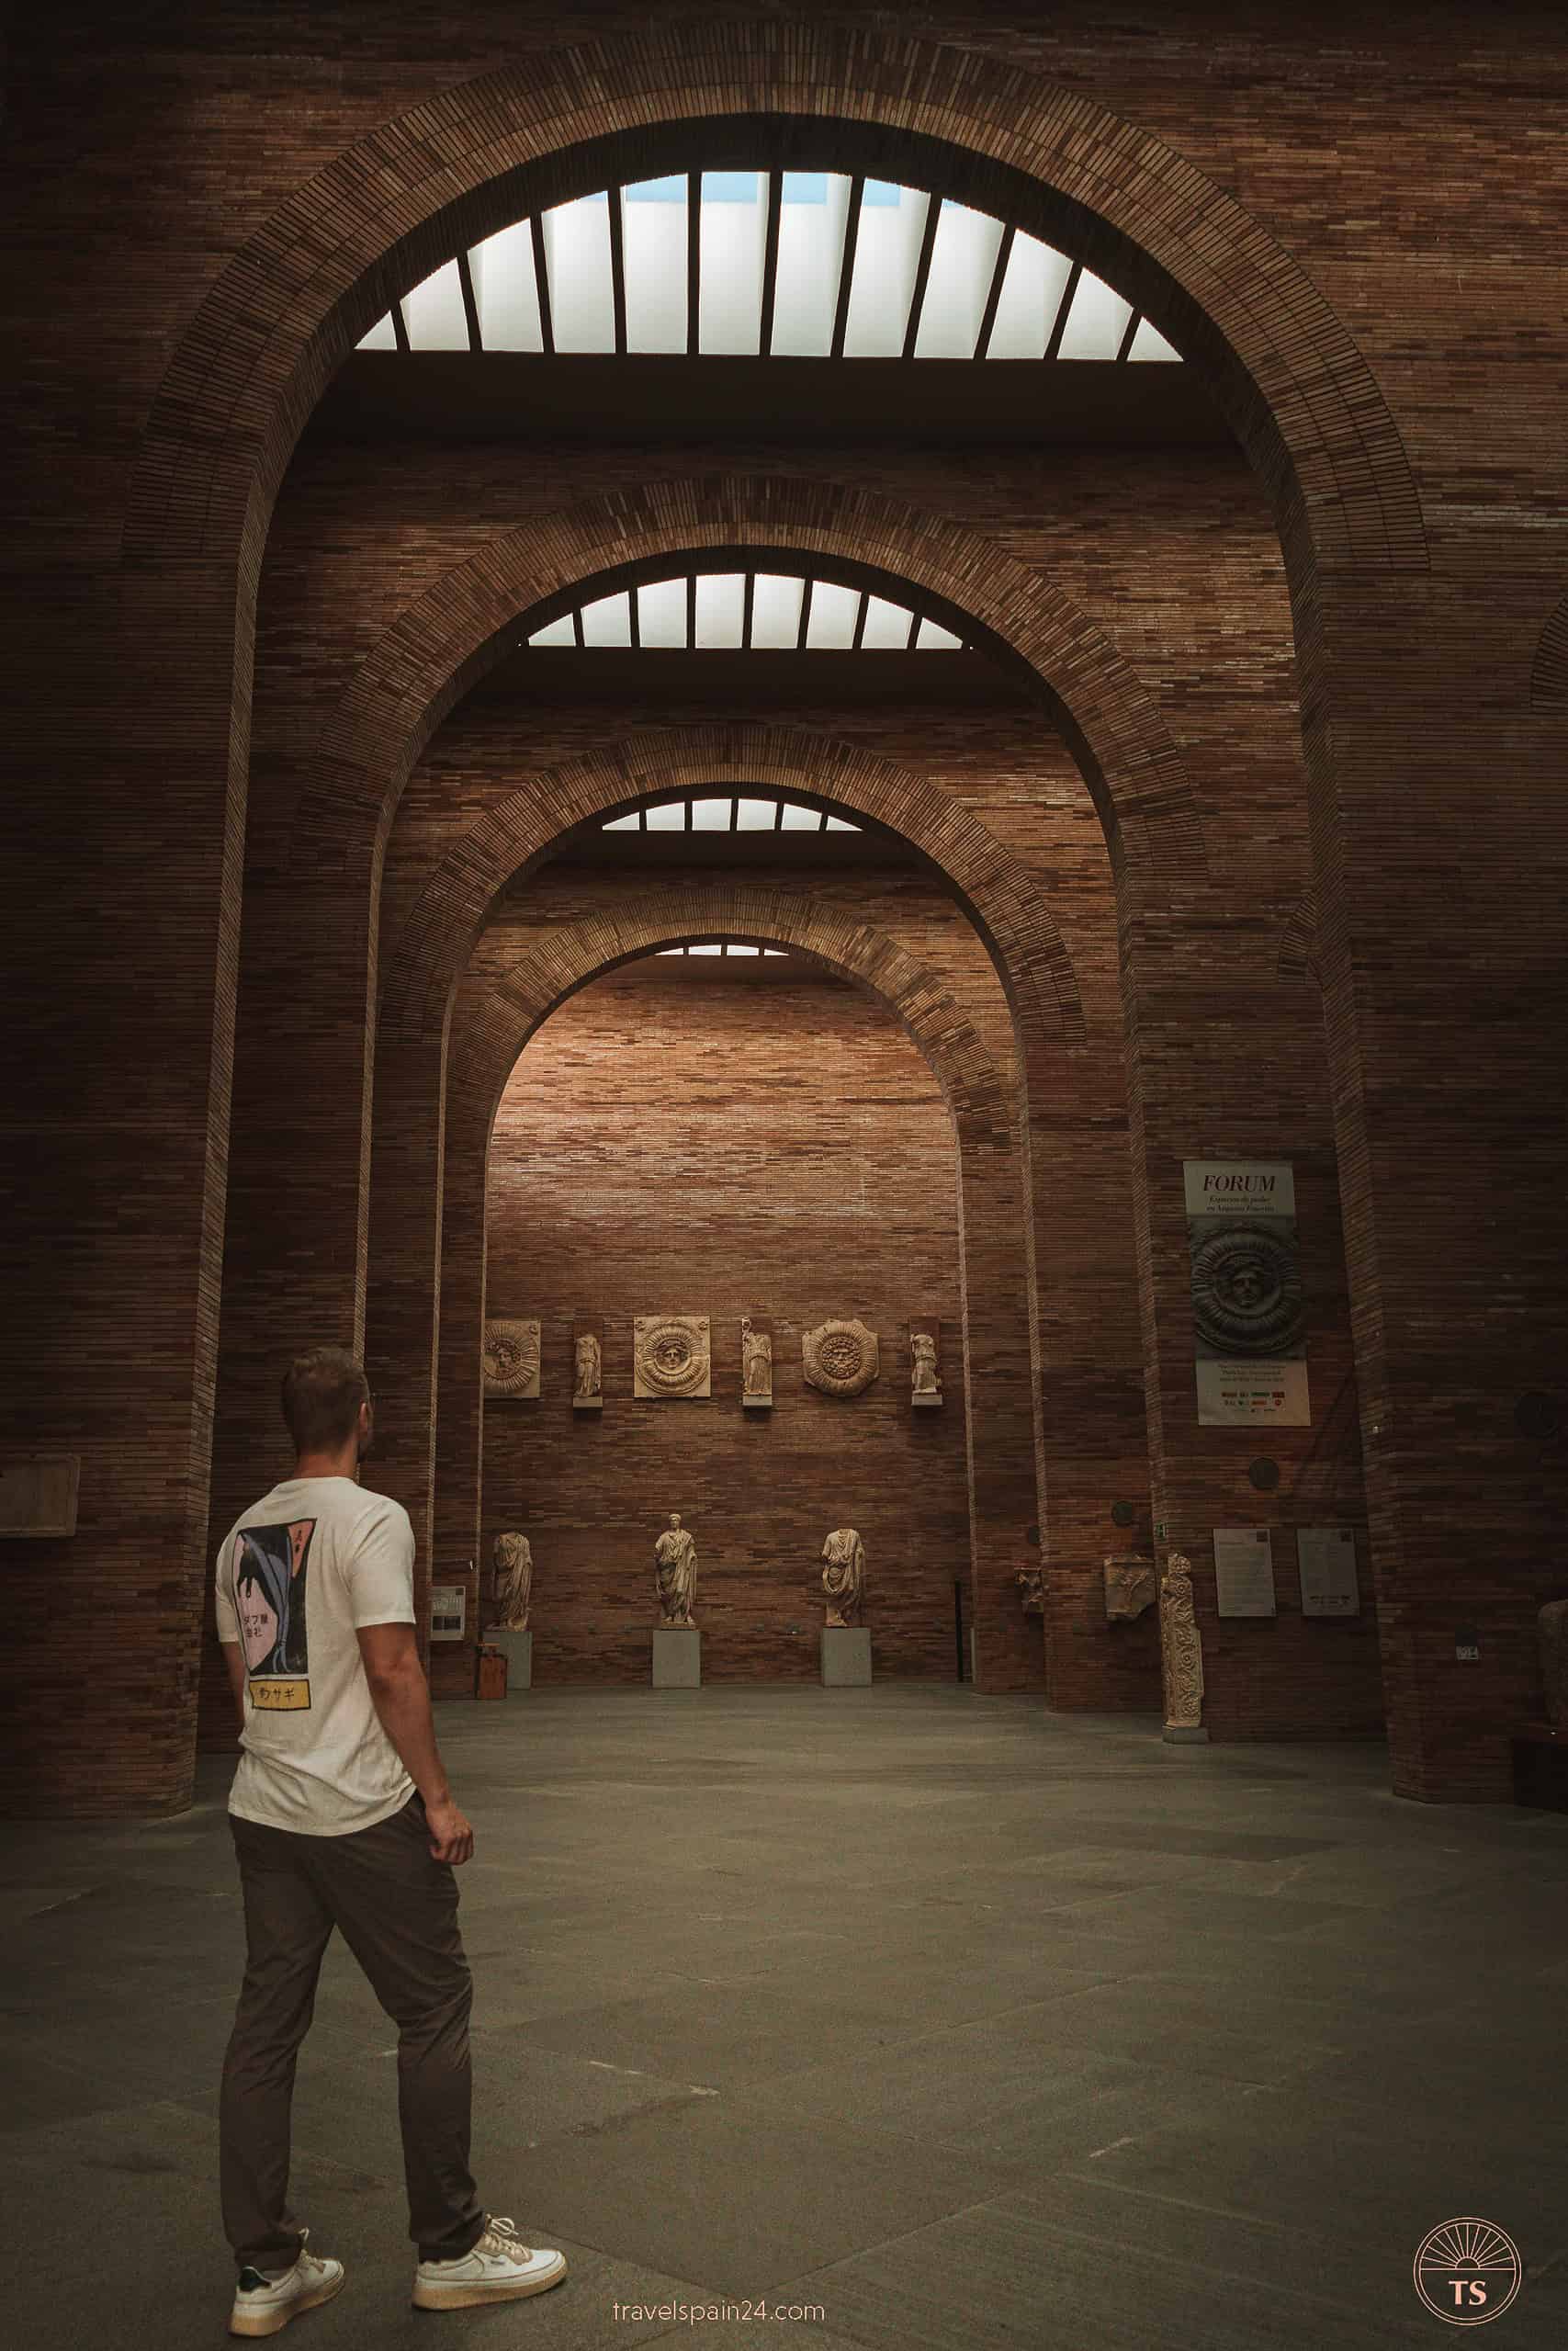 Timon van Basten inside the National Museum of Roman Art in Mérida, walking towards a collection of ancient Roman statues, flanked by tall arched brick entrances.